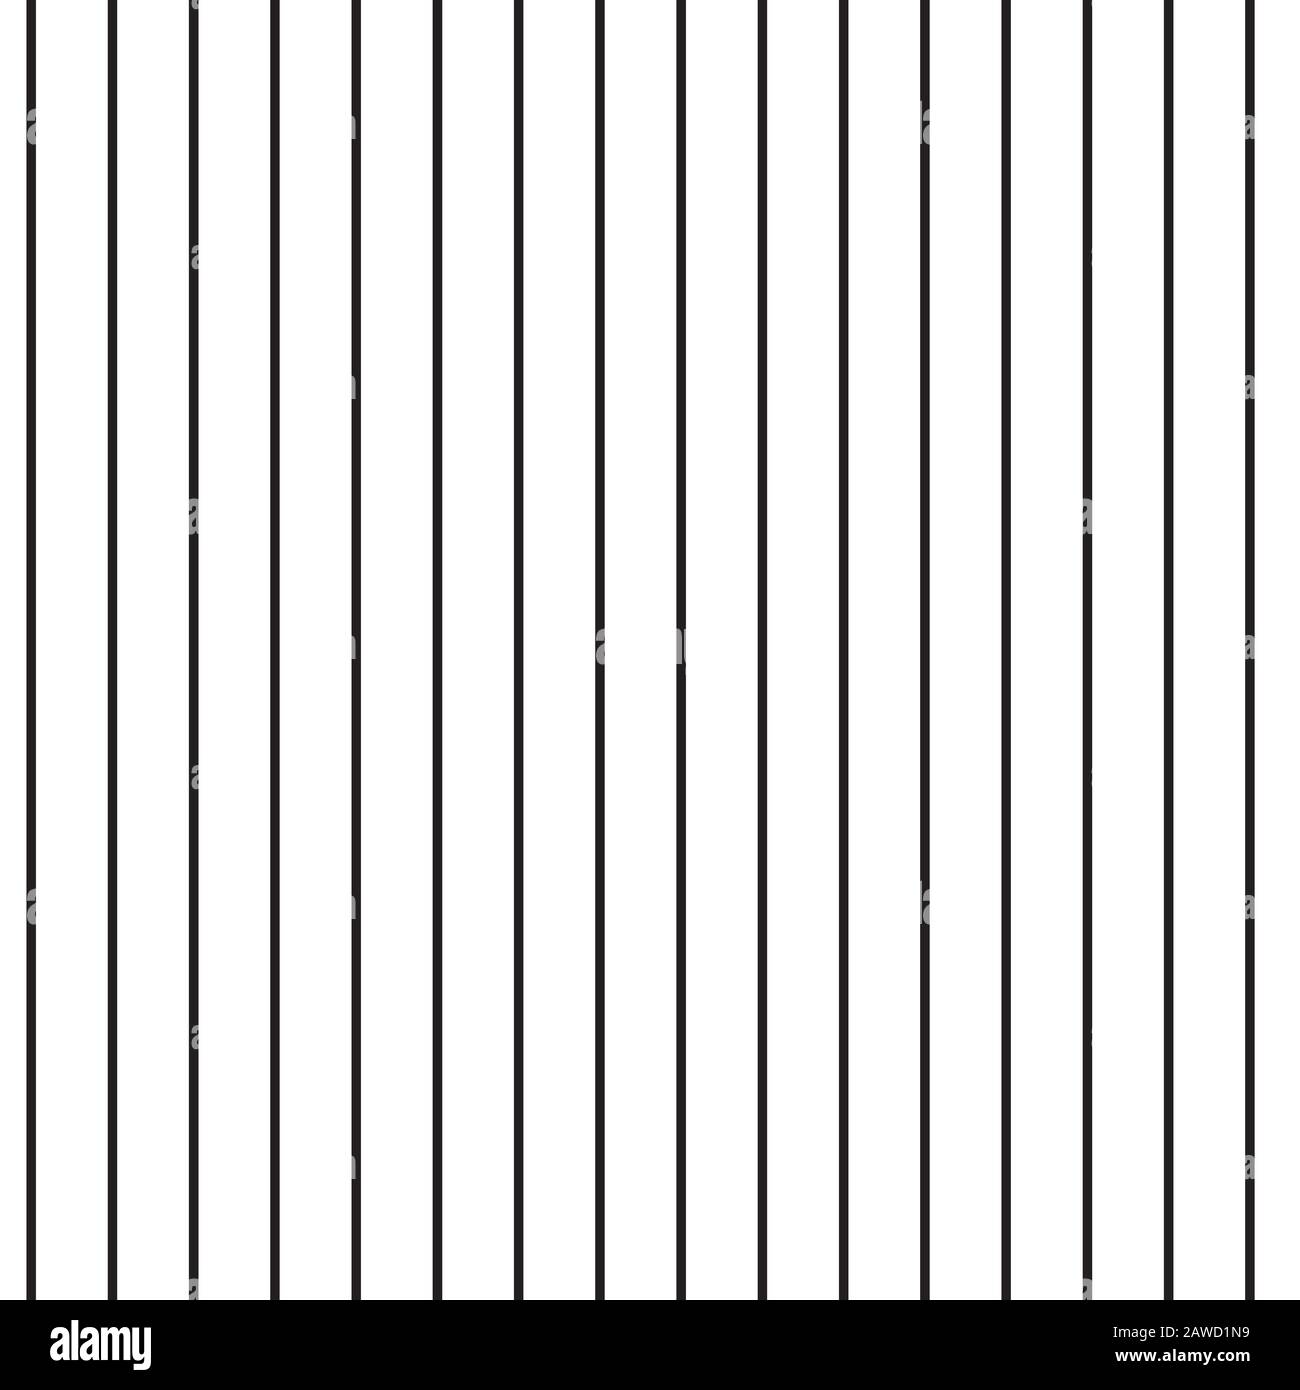 Vertical stripes pattern. Seamless pattern of black and white